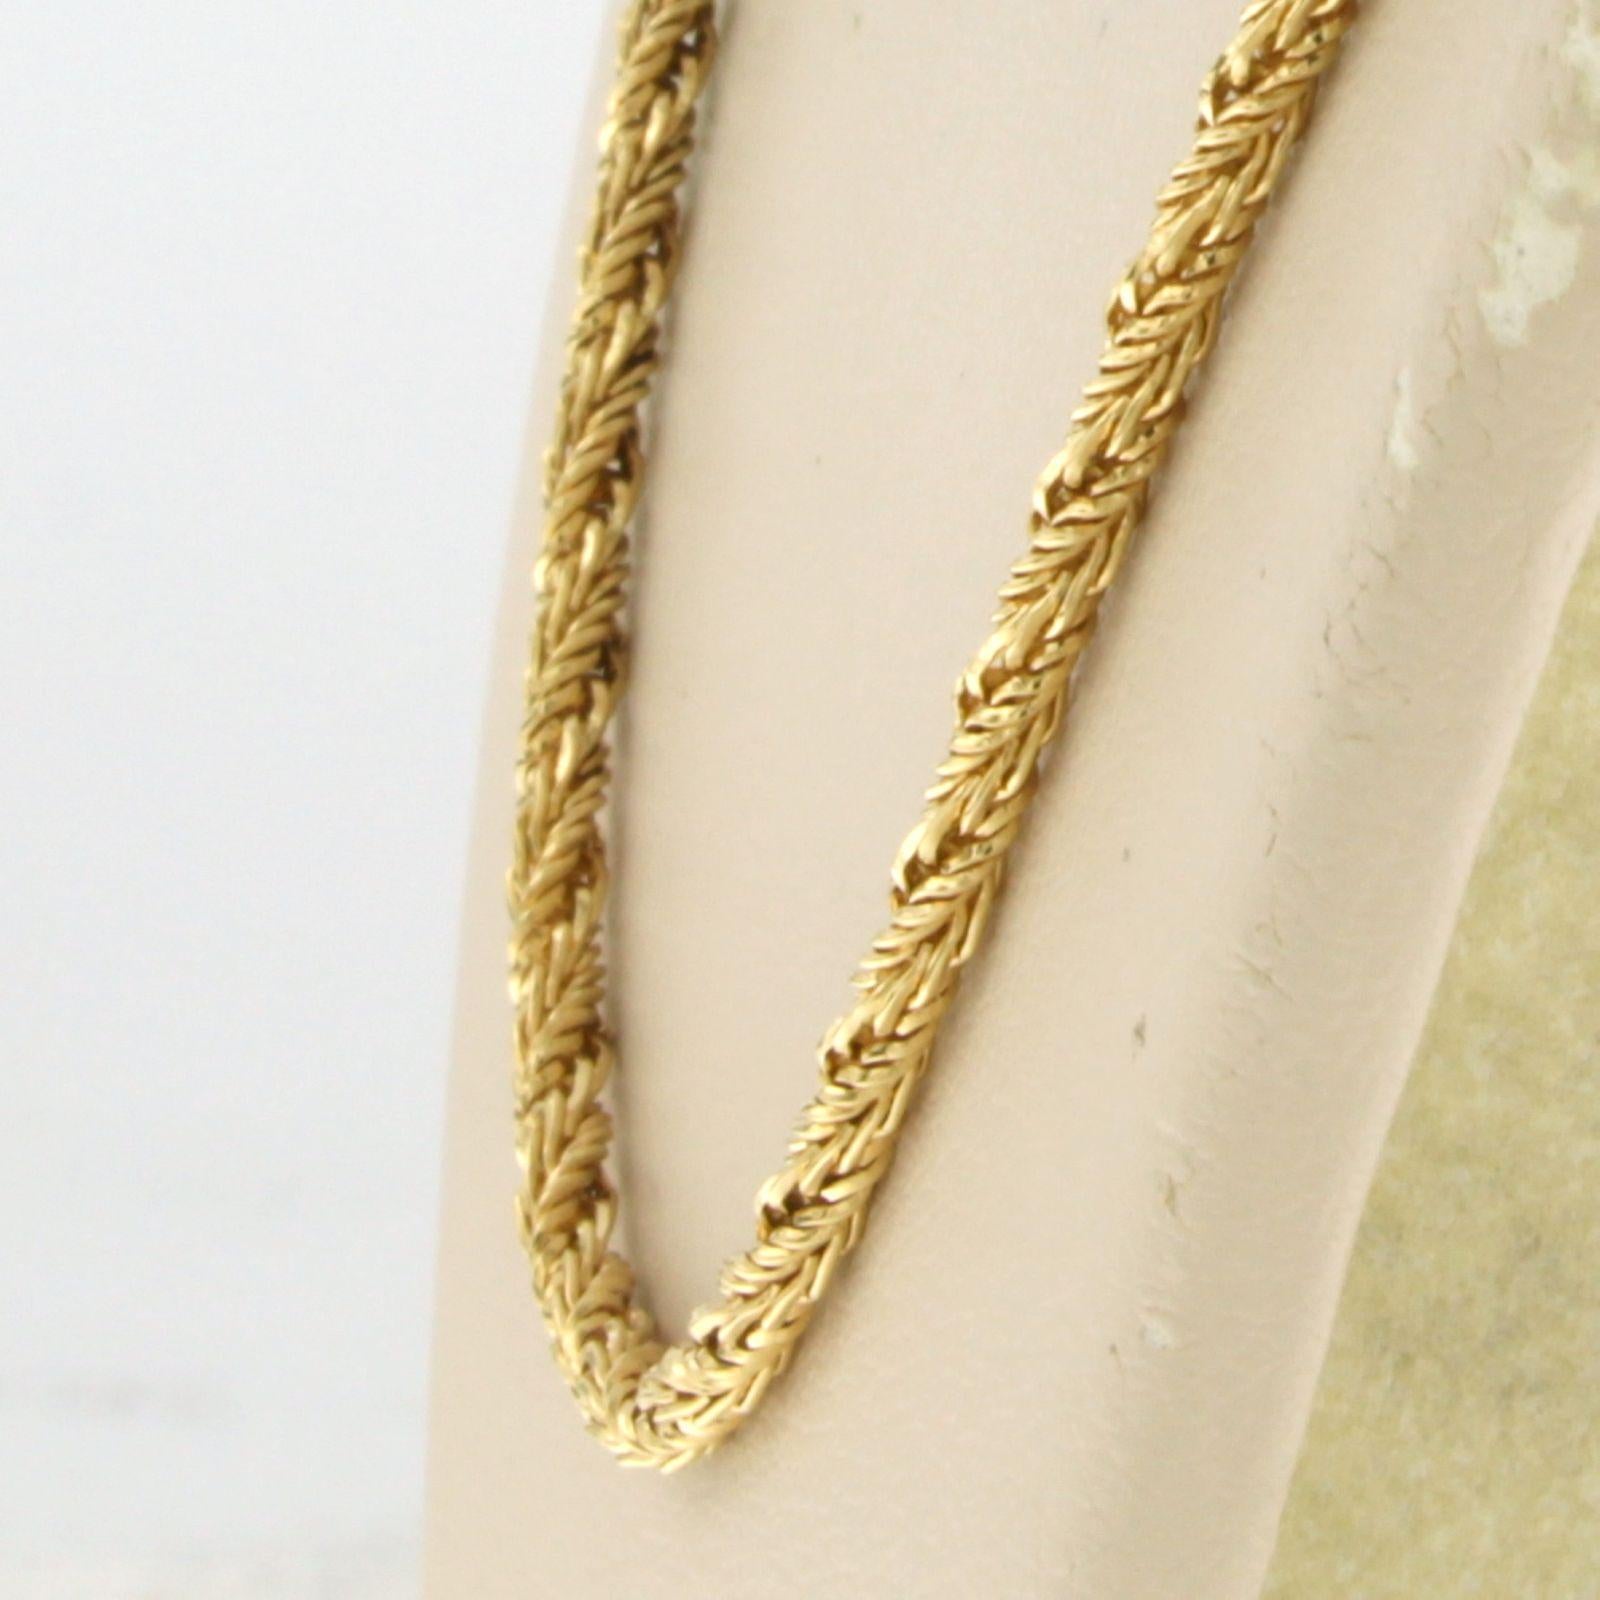 18k yellow gold necklace - 55 cm long

detailed description:

necklace is 55 cm long and 2.2 mm wide

total weight: 13.8 grams

hallmark present and tested for gold content

necklace is in good condition
b16241